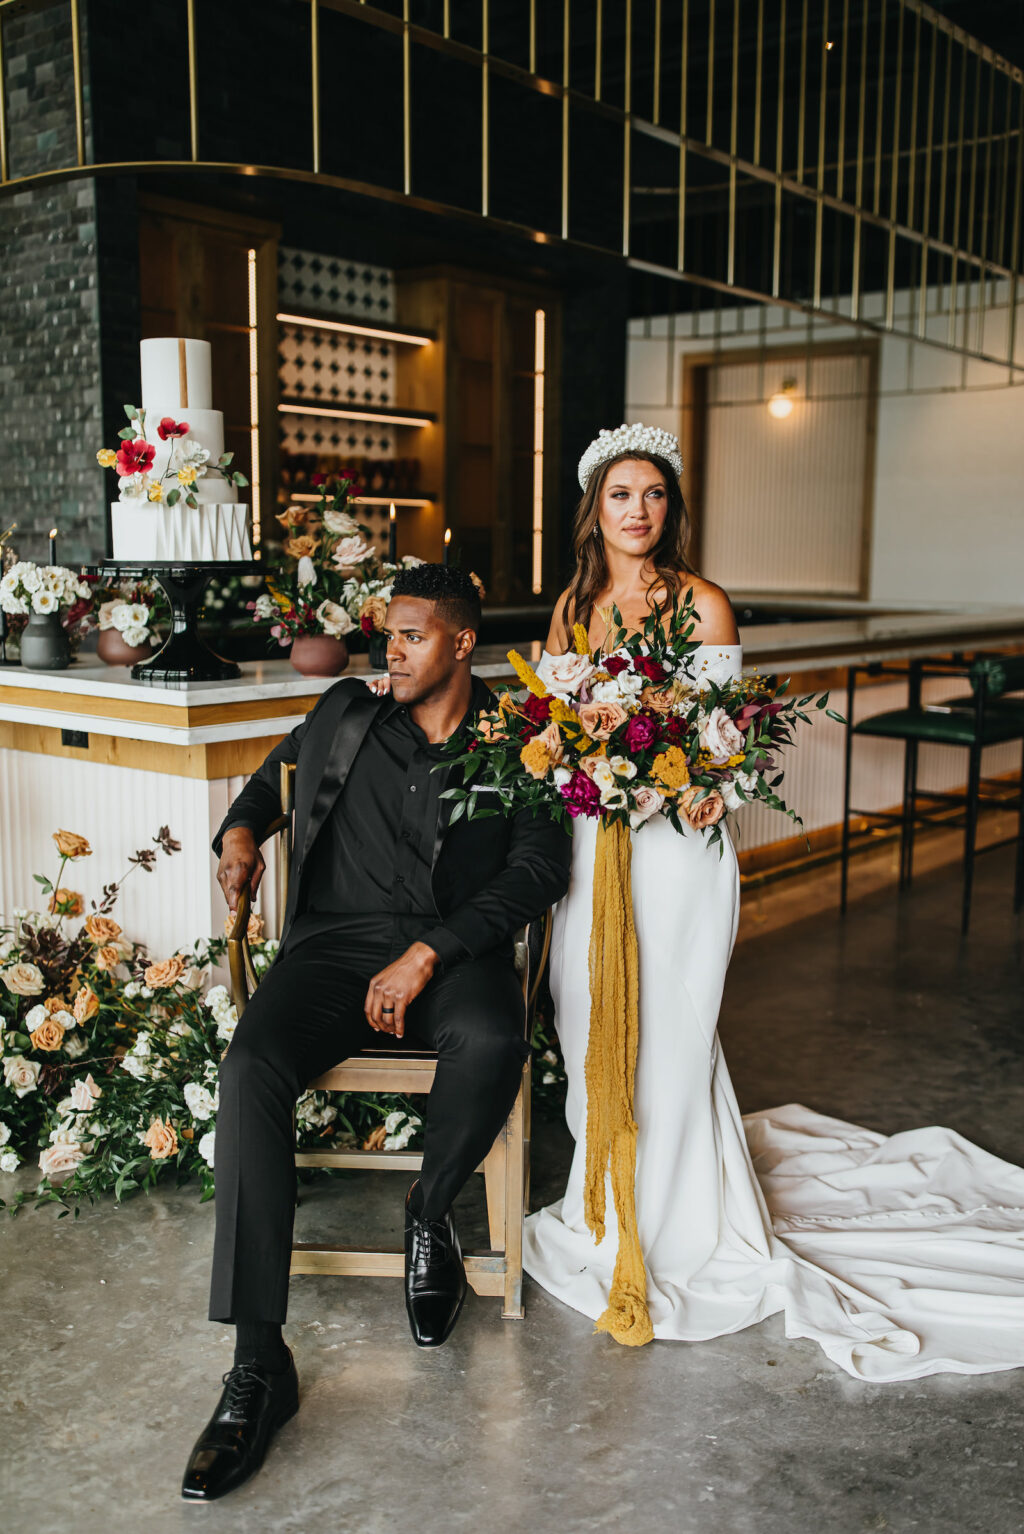 Modern and Edgy Fall Wedding Reception, Groom Wearing All Black Tuxedo with Bride Wearing Off the Shoulder Wedding Dress, Thick Pearl Headdband, Holding Jewel Tone Floral Bouquet, Burgundy Red, White, Blush Pink and Yellow Roses with Greenery Flowers and Mustard Yellow Hanging Linen | Tampa Bay Wedding Venue Hyde House